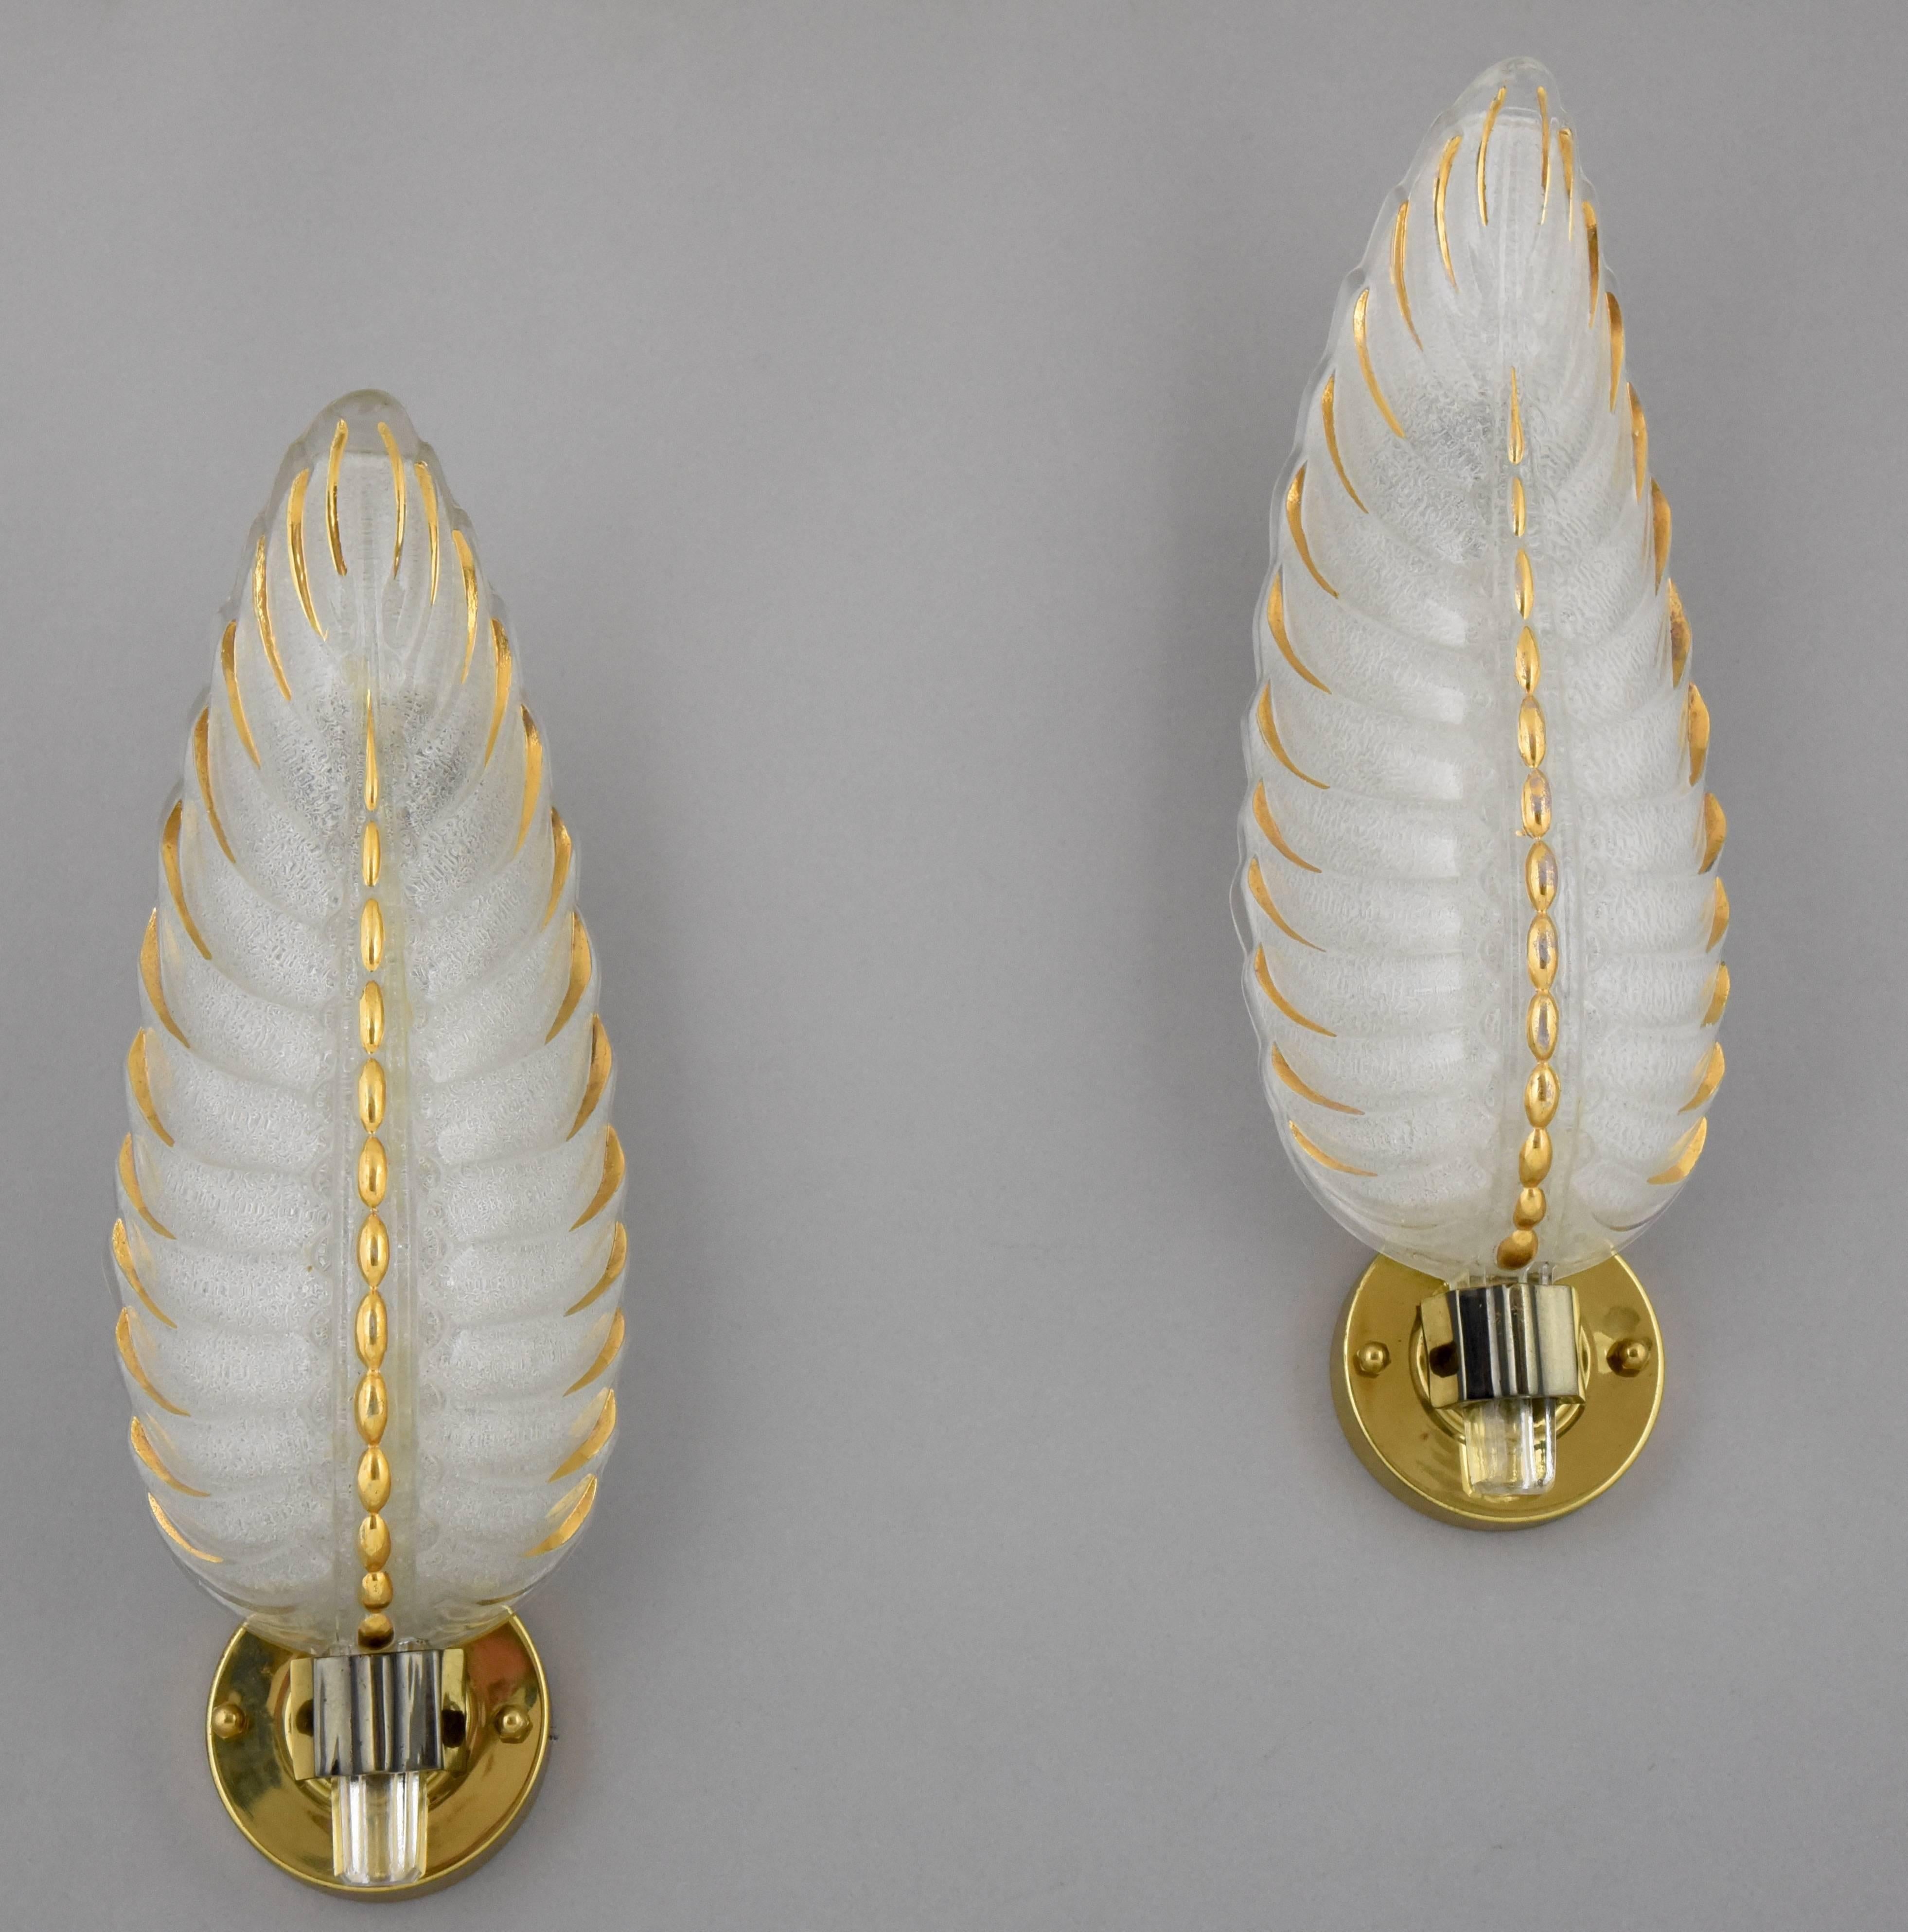 An elegant pair of feather shaped, frosted glass wall sconces with gold accents and a bronze frame signed by Ezan.